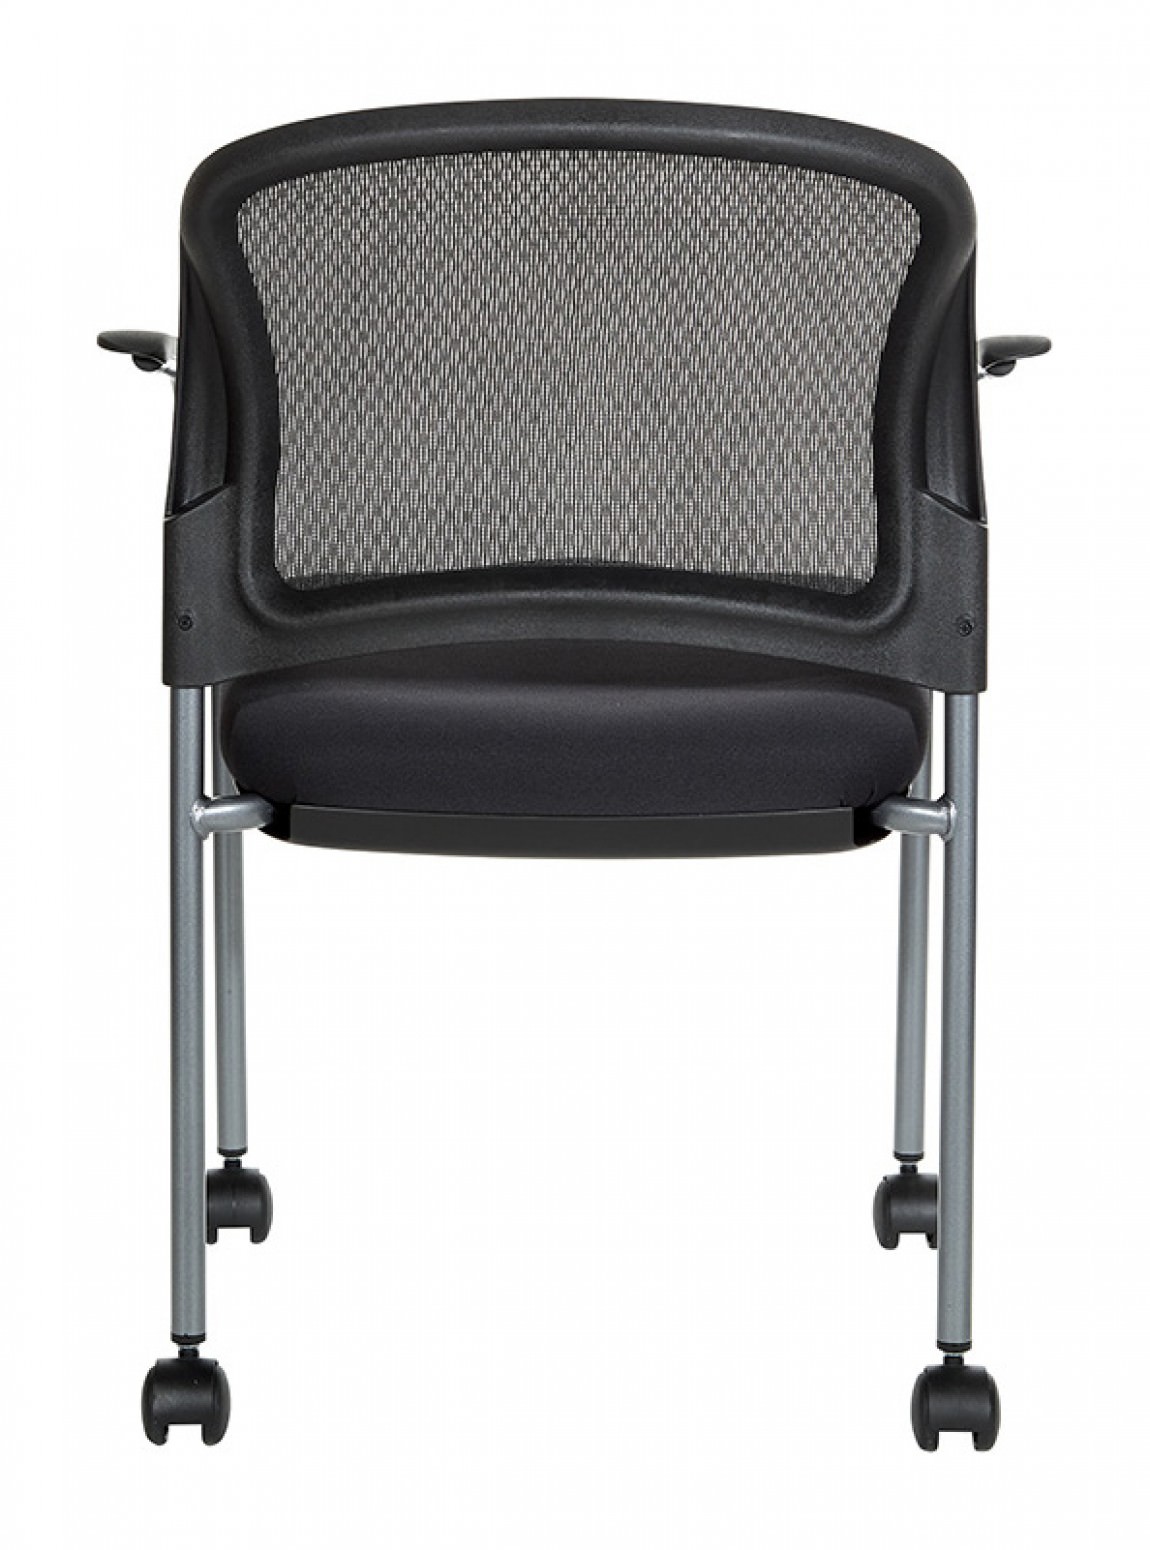 Rolling Mesh Back Stacking Chair